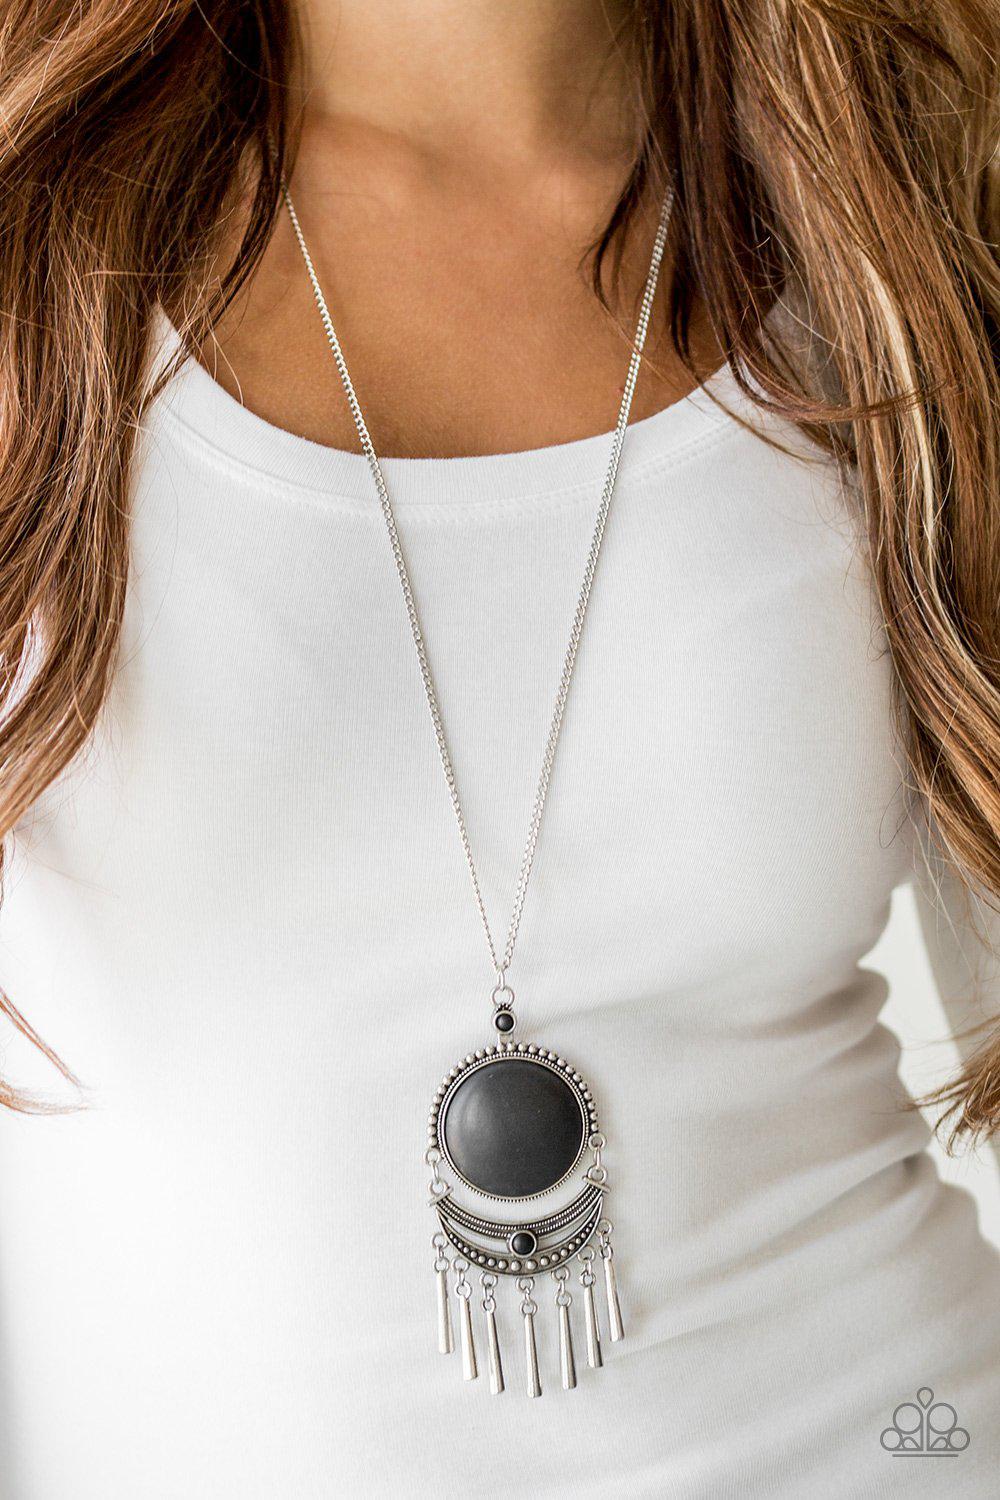 Rural Rustler Black Stone Necklace - Paparazzi Accessories- lightbox - CarasShop.com - $5 Jewelry by Cara Jewels